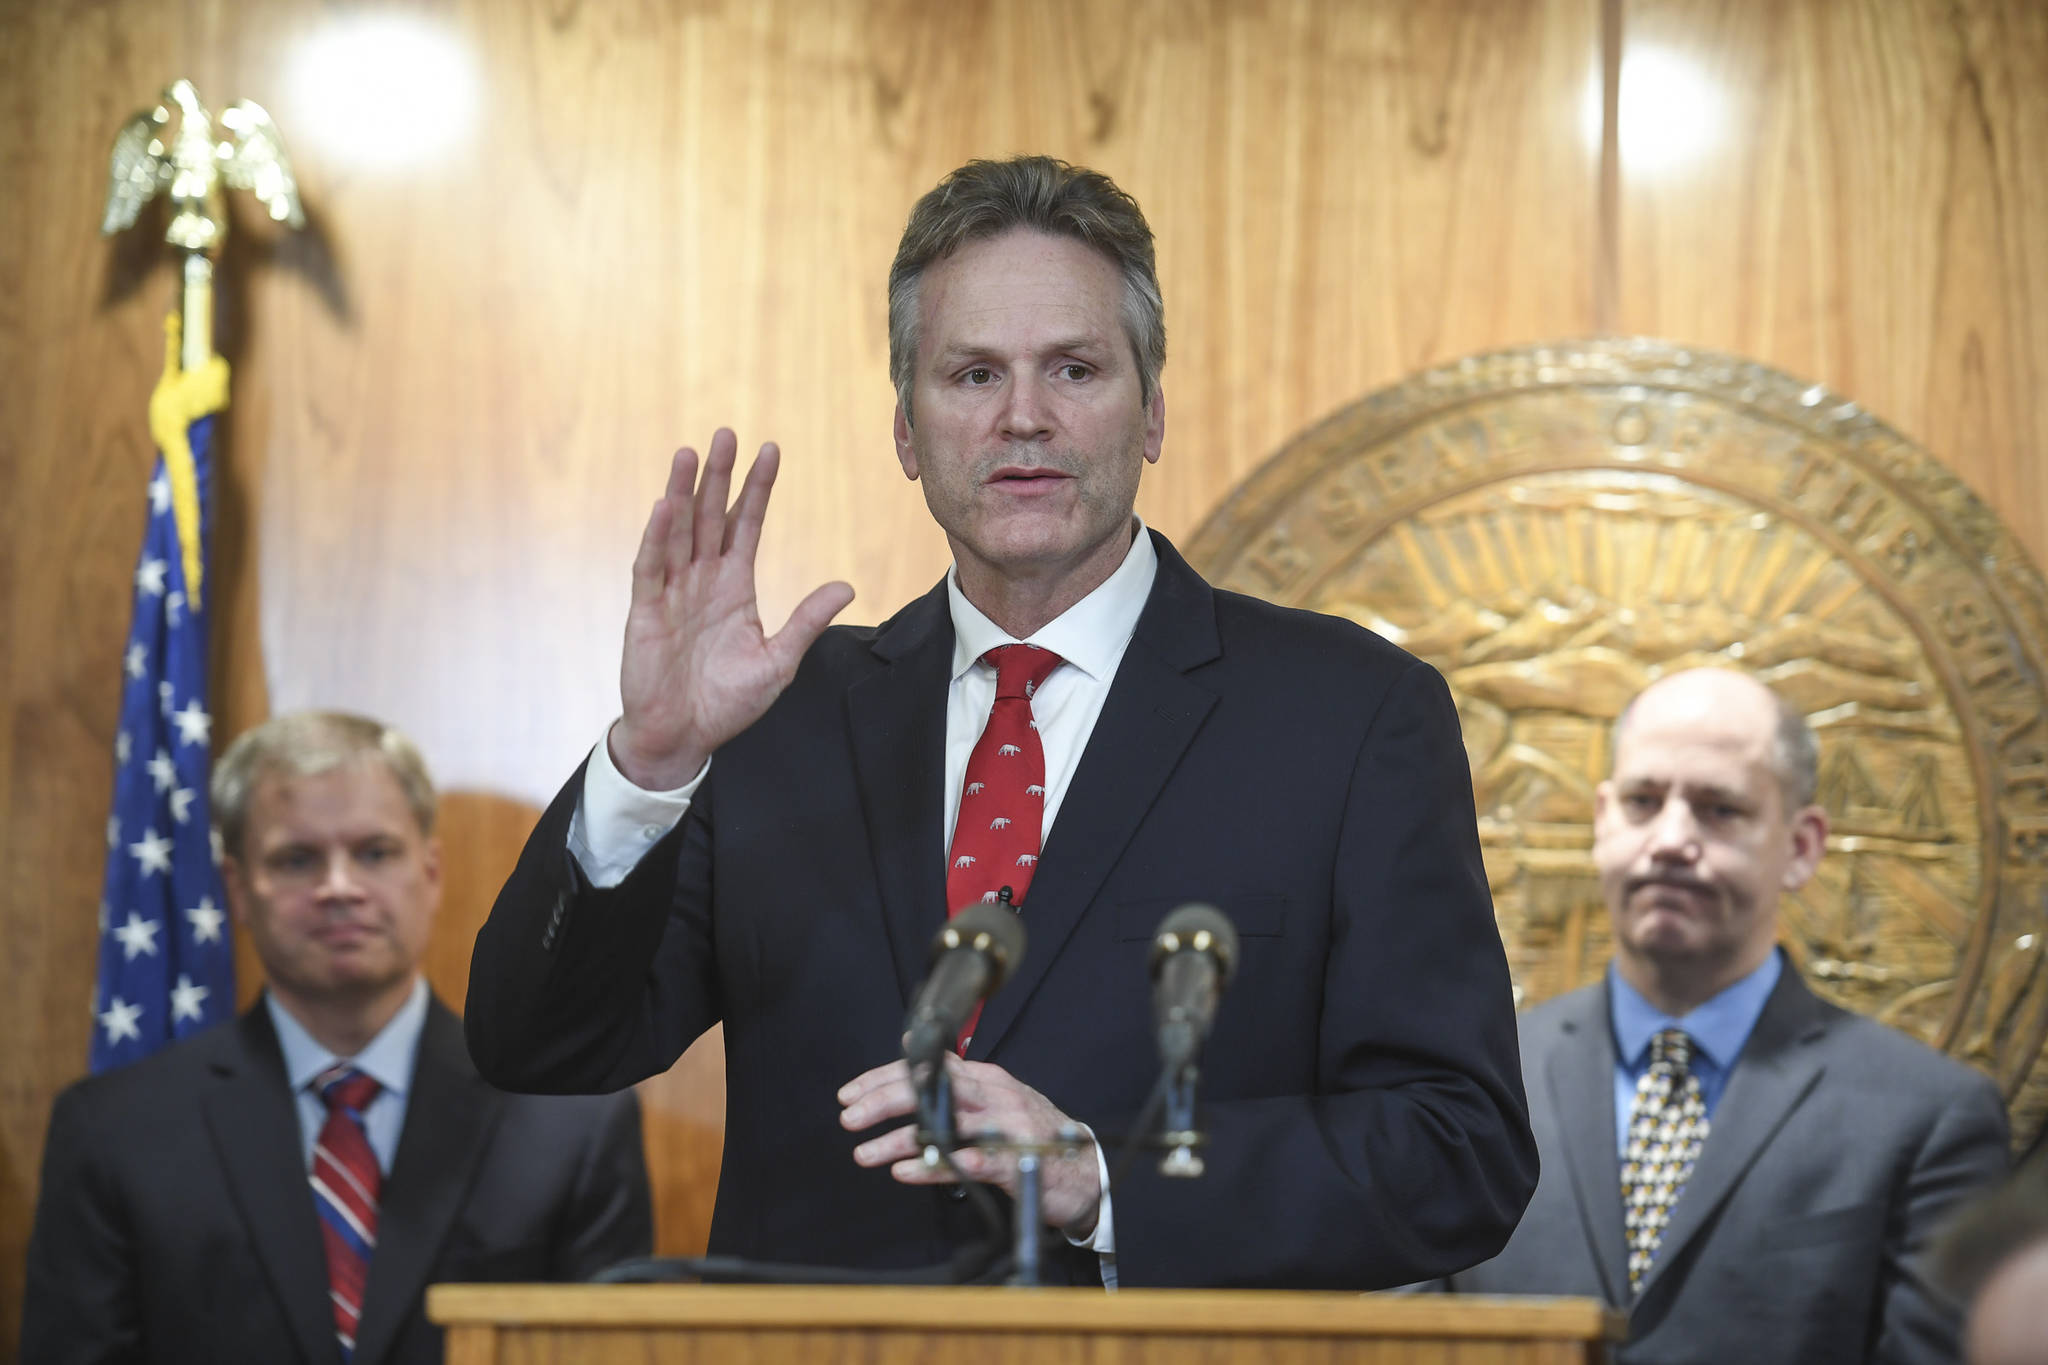 Gov. Mike Dunleavy announces his state budget during a press conference at the Capitol on Wednesday, Dec. 11, 2019. (Michael Penn | Juneau Empire)